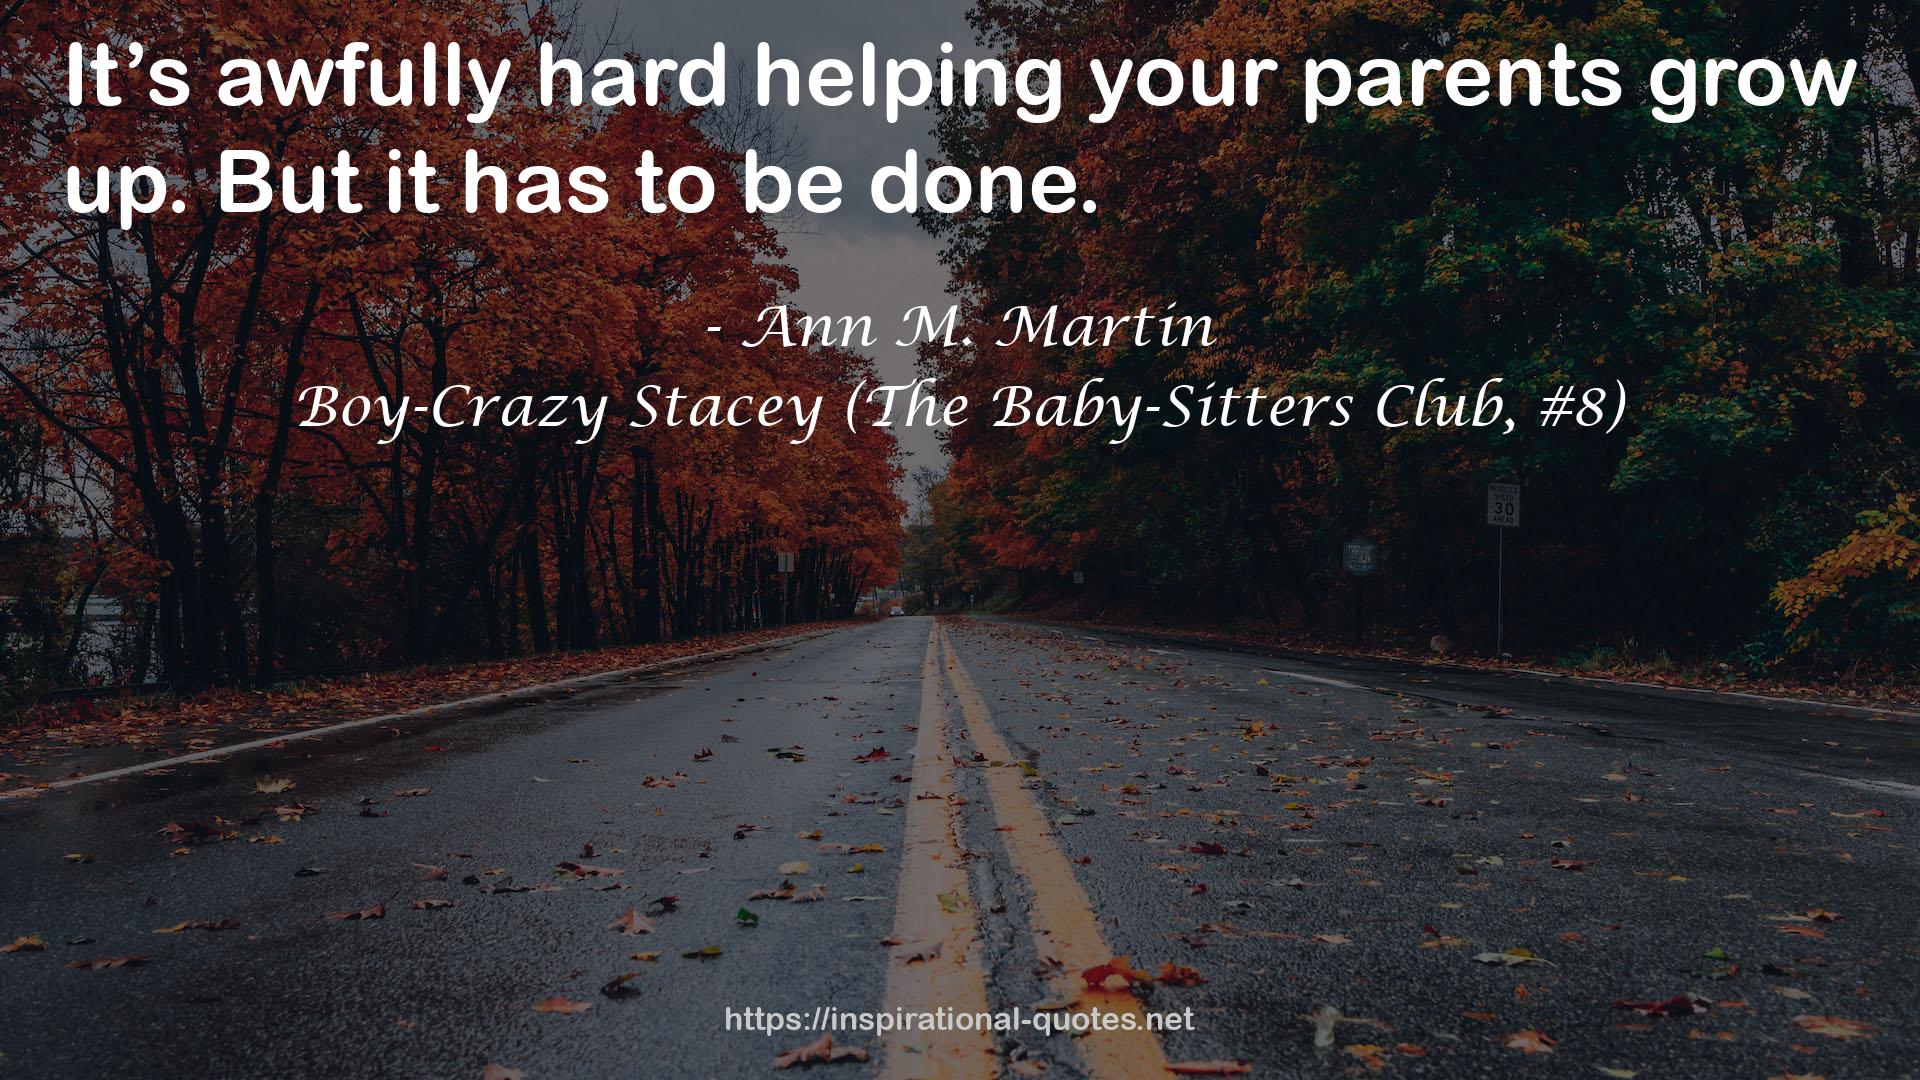 Boy-Crazy Stacey (The Baby-Sitters Club, #8) QUOTES